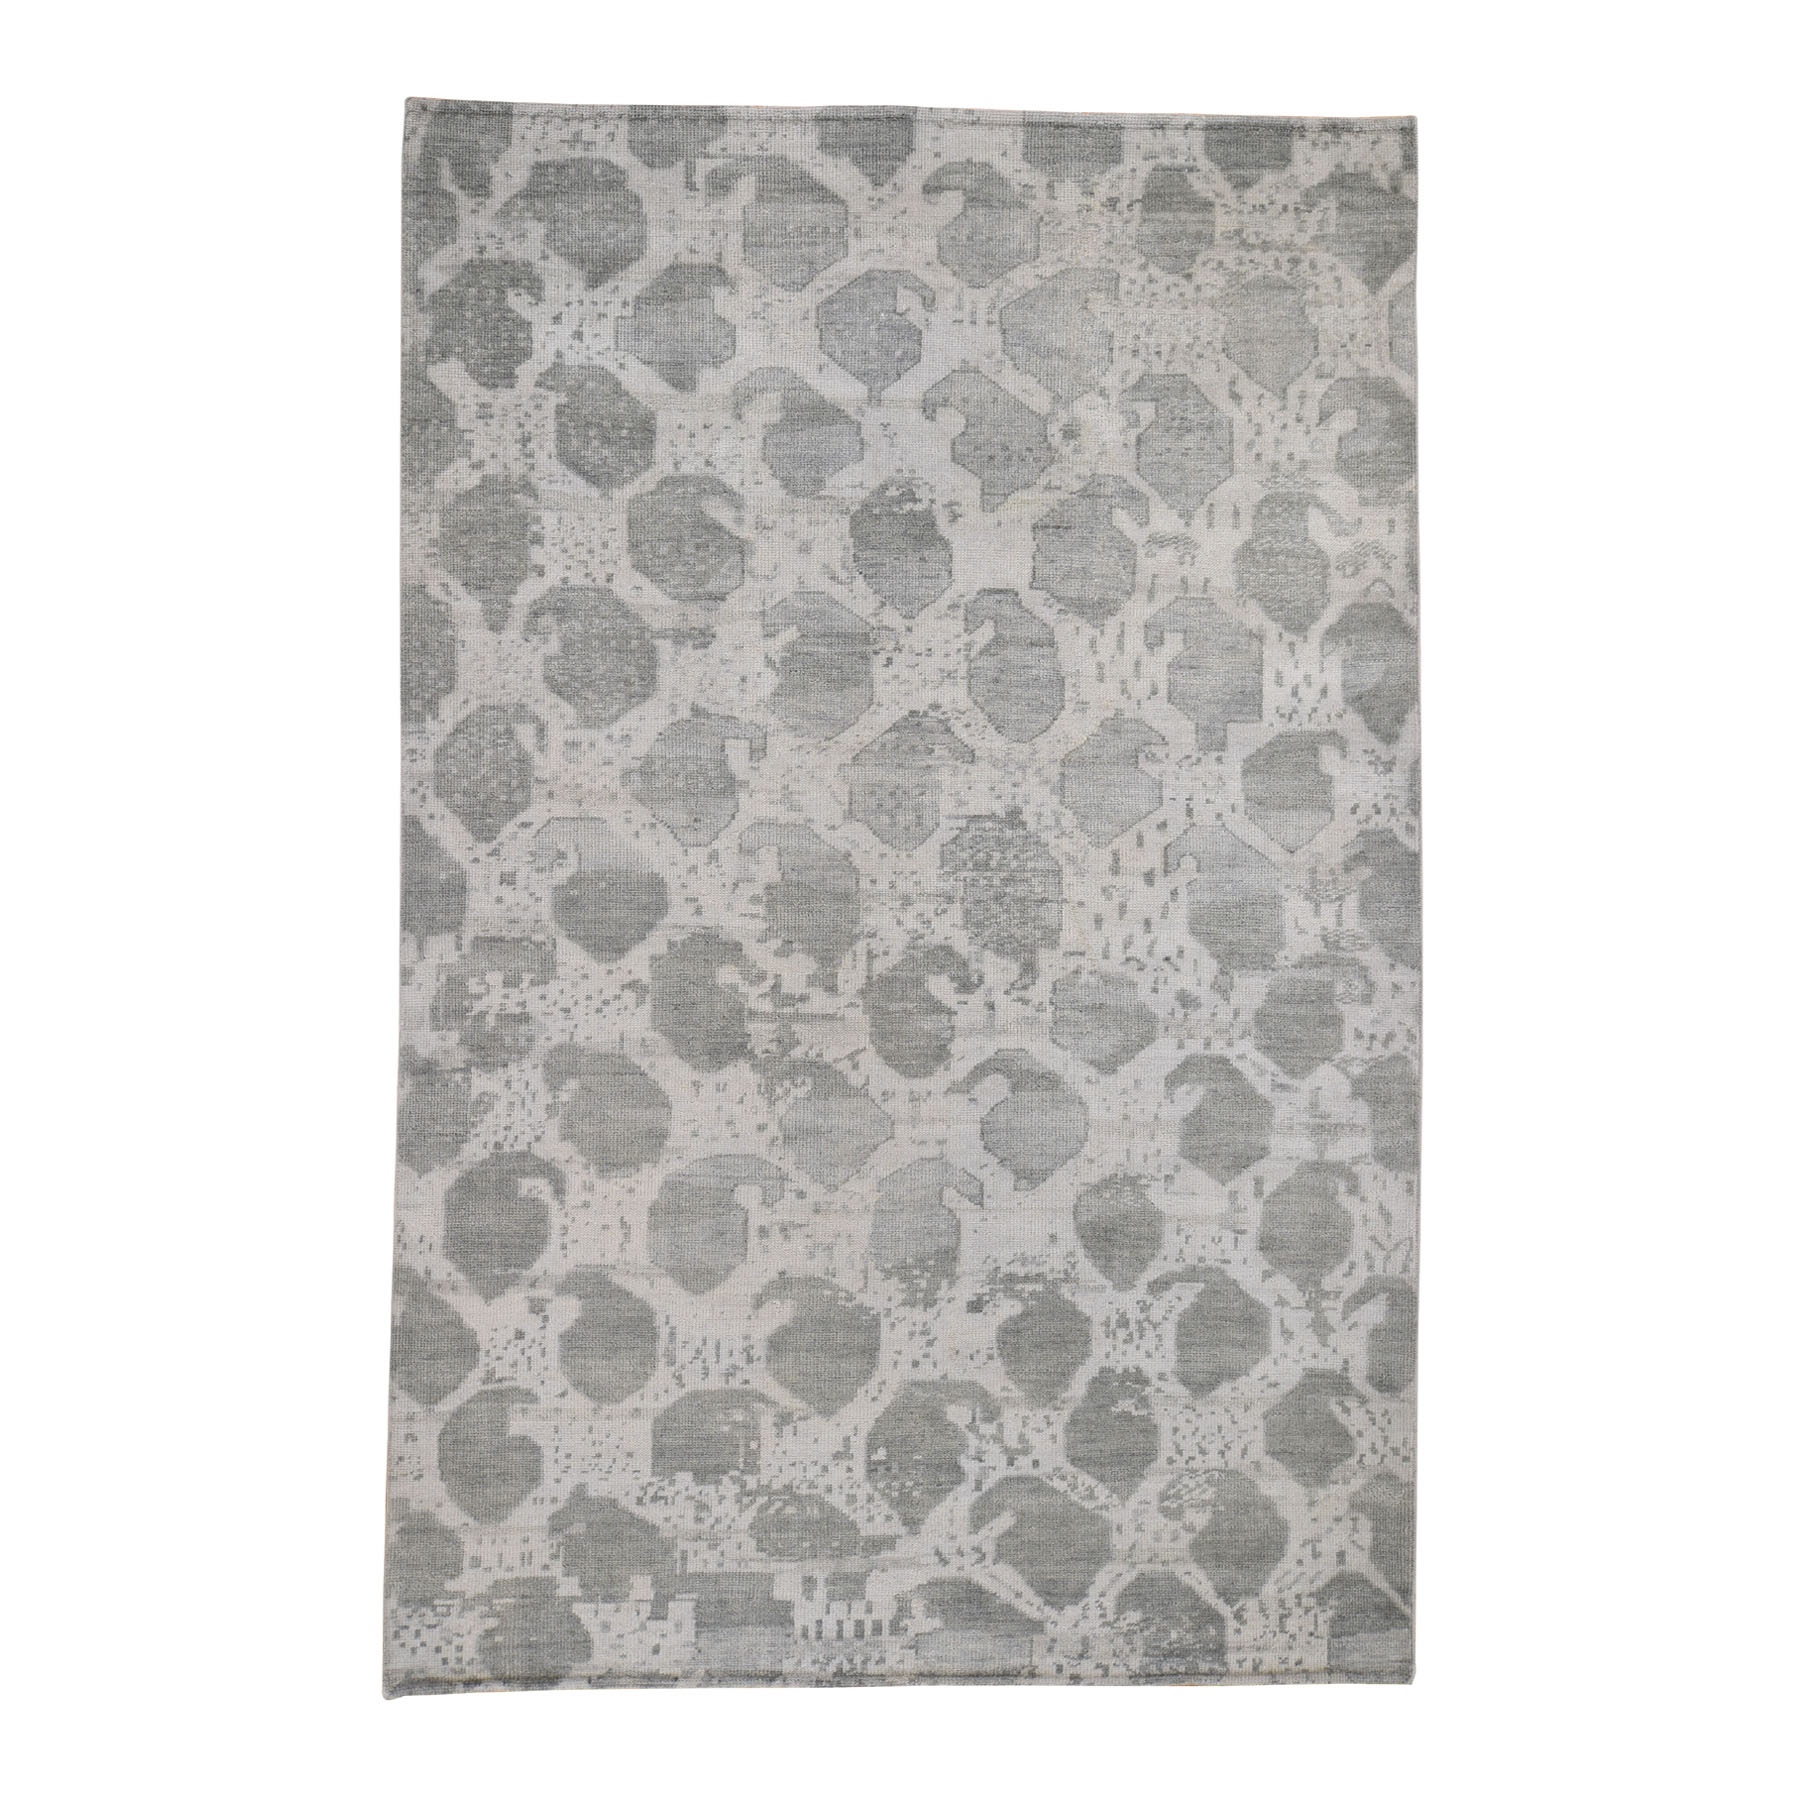 5'10"x9' Distressed Look White Wash Oushak Boteh Design  Pure Wool Hand Woven Oriental Rug 